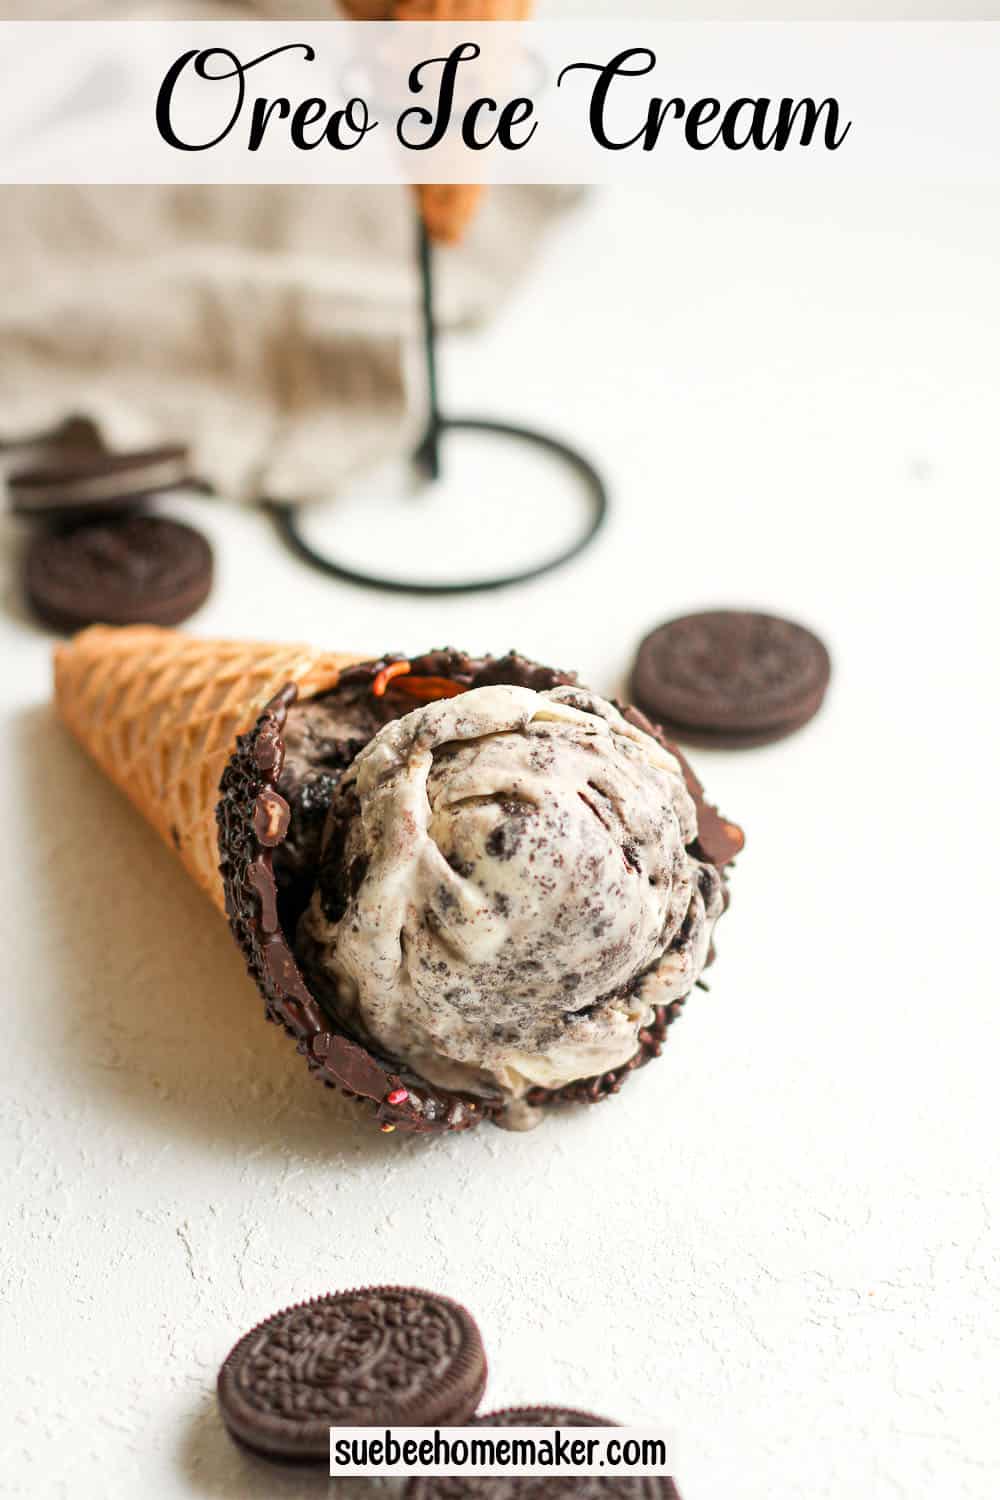 An Oreo ice cream cone laying on the white surface.